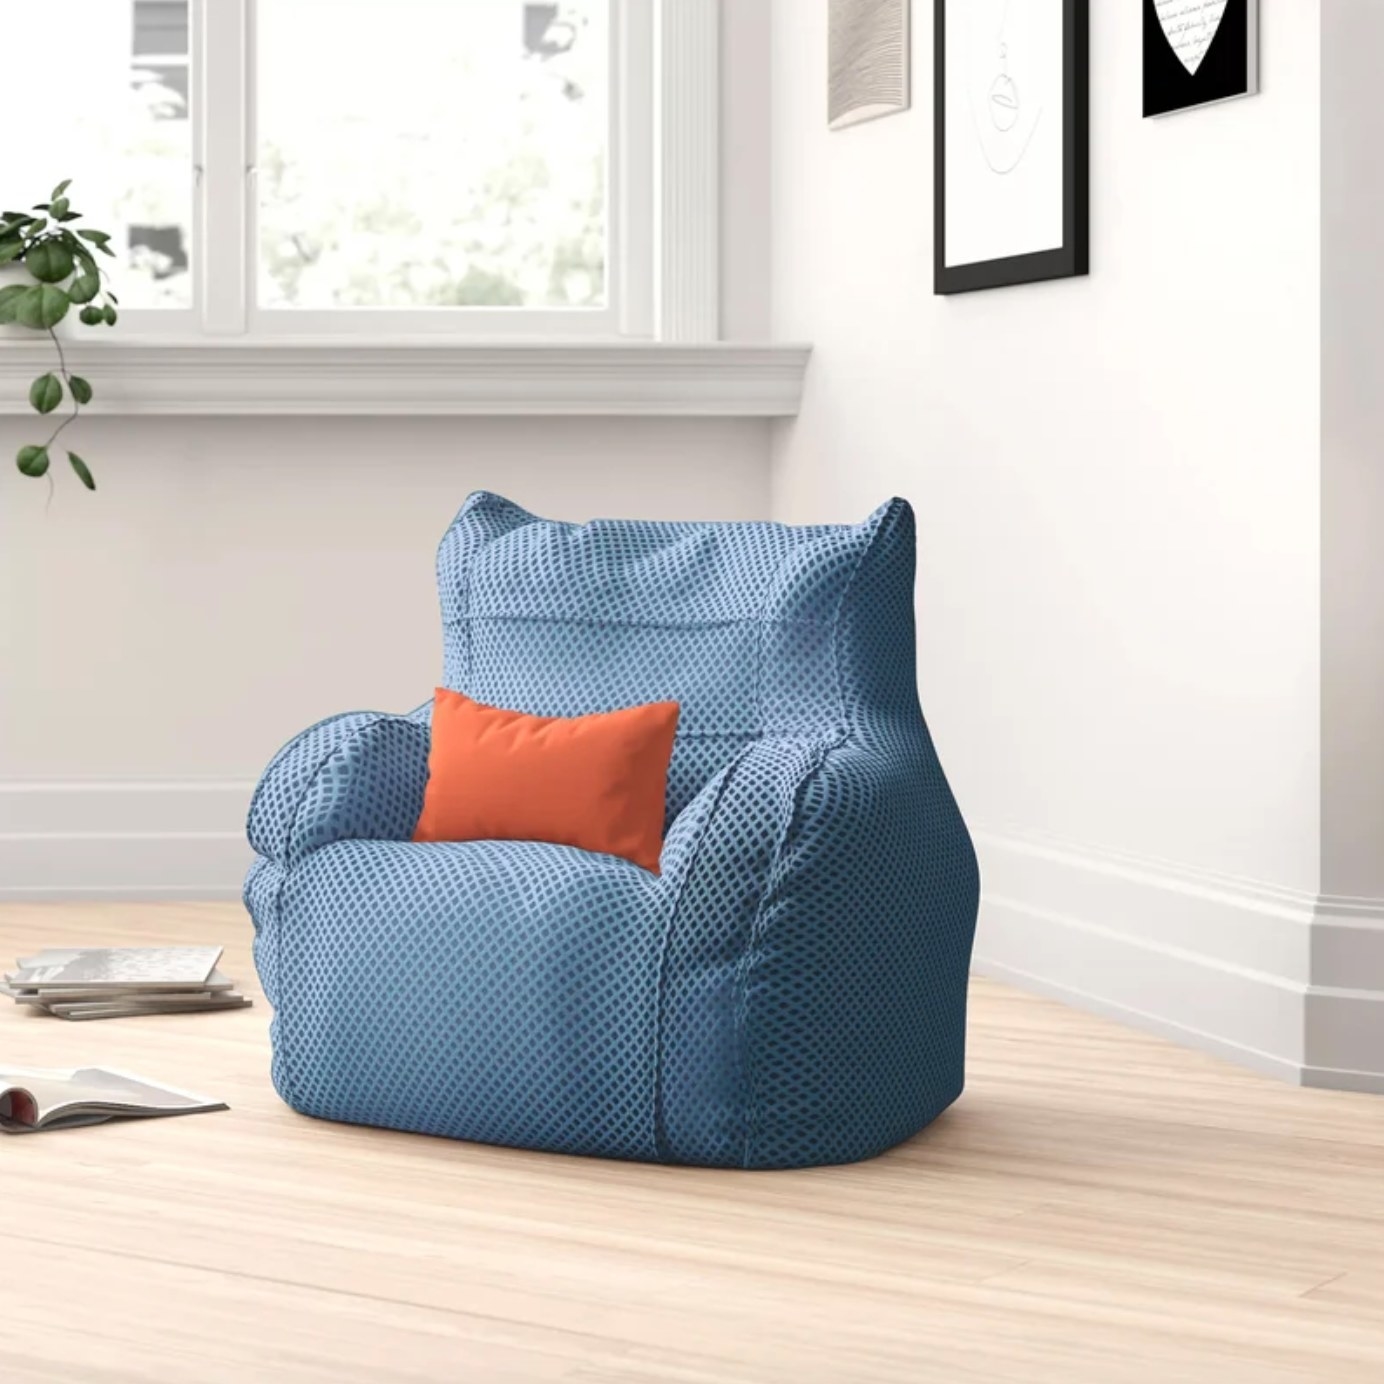 The bean bag chair and lounger in blue